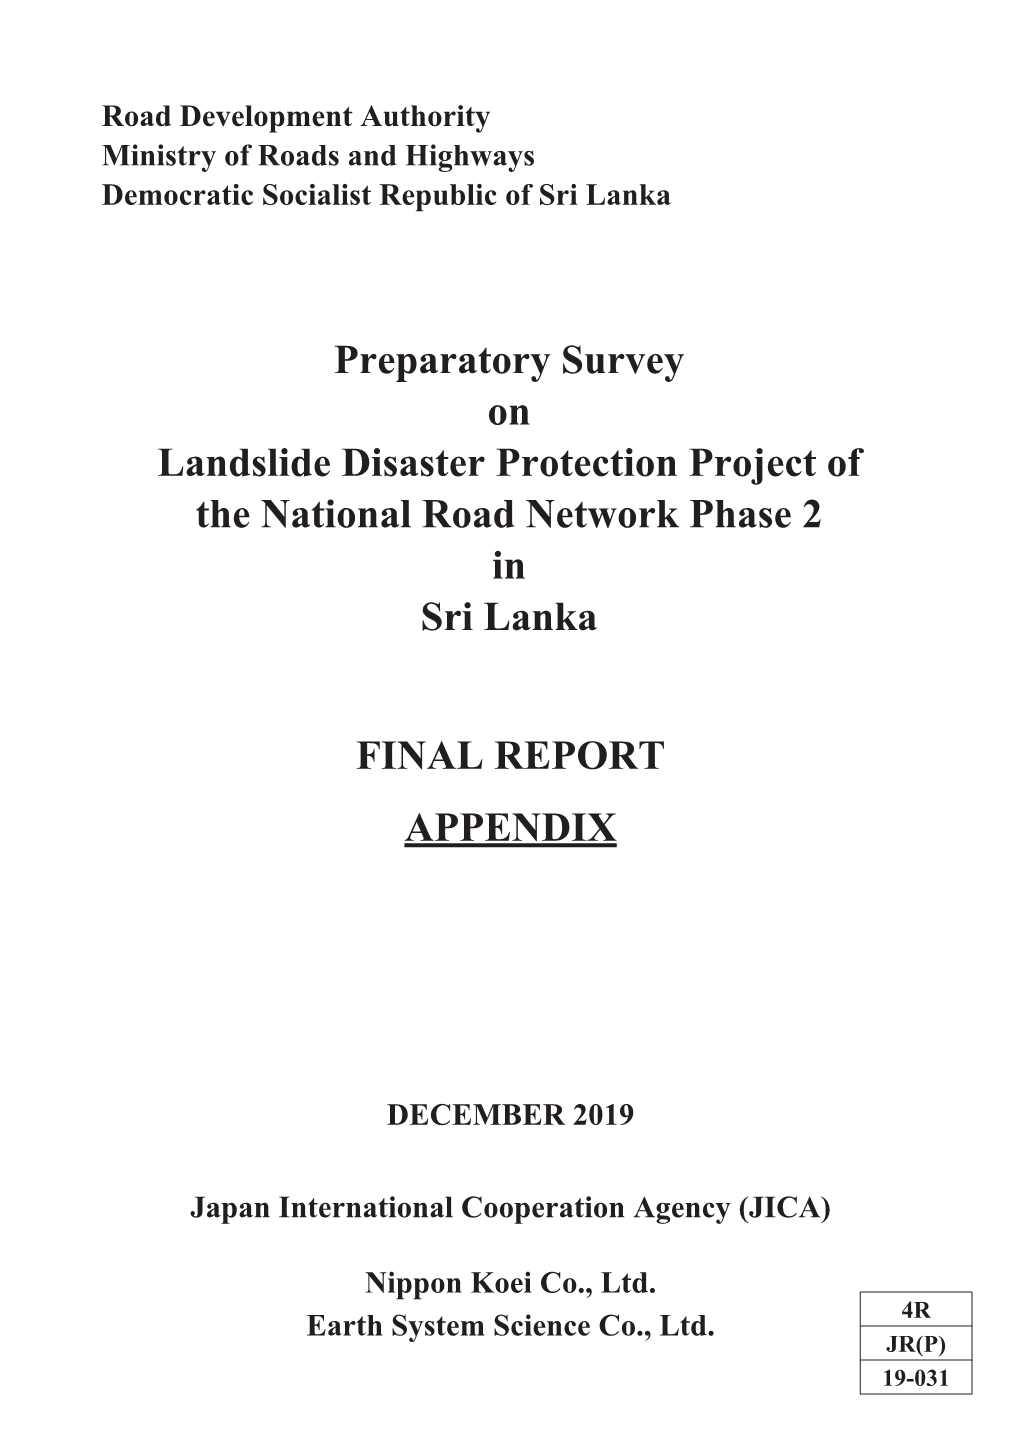 Preparatory Survey on Landslide Disaster Protection Project of the National Road Network Phase 2 in Sri Lanka